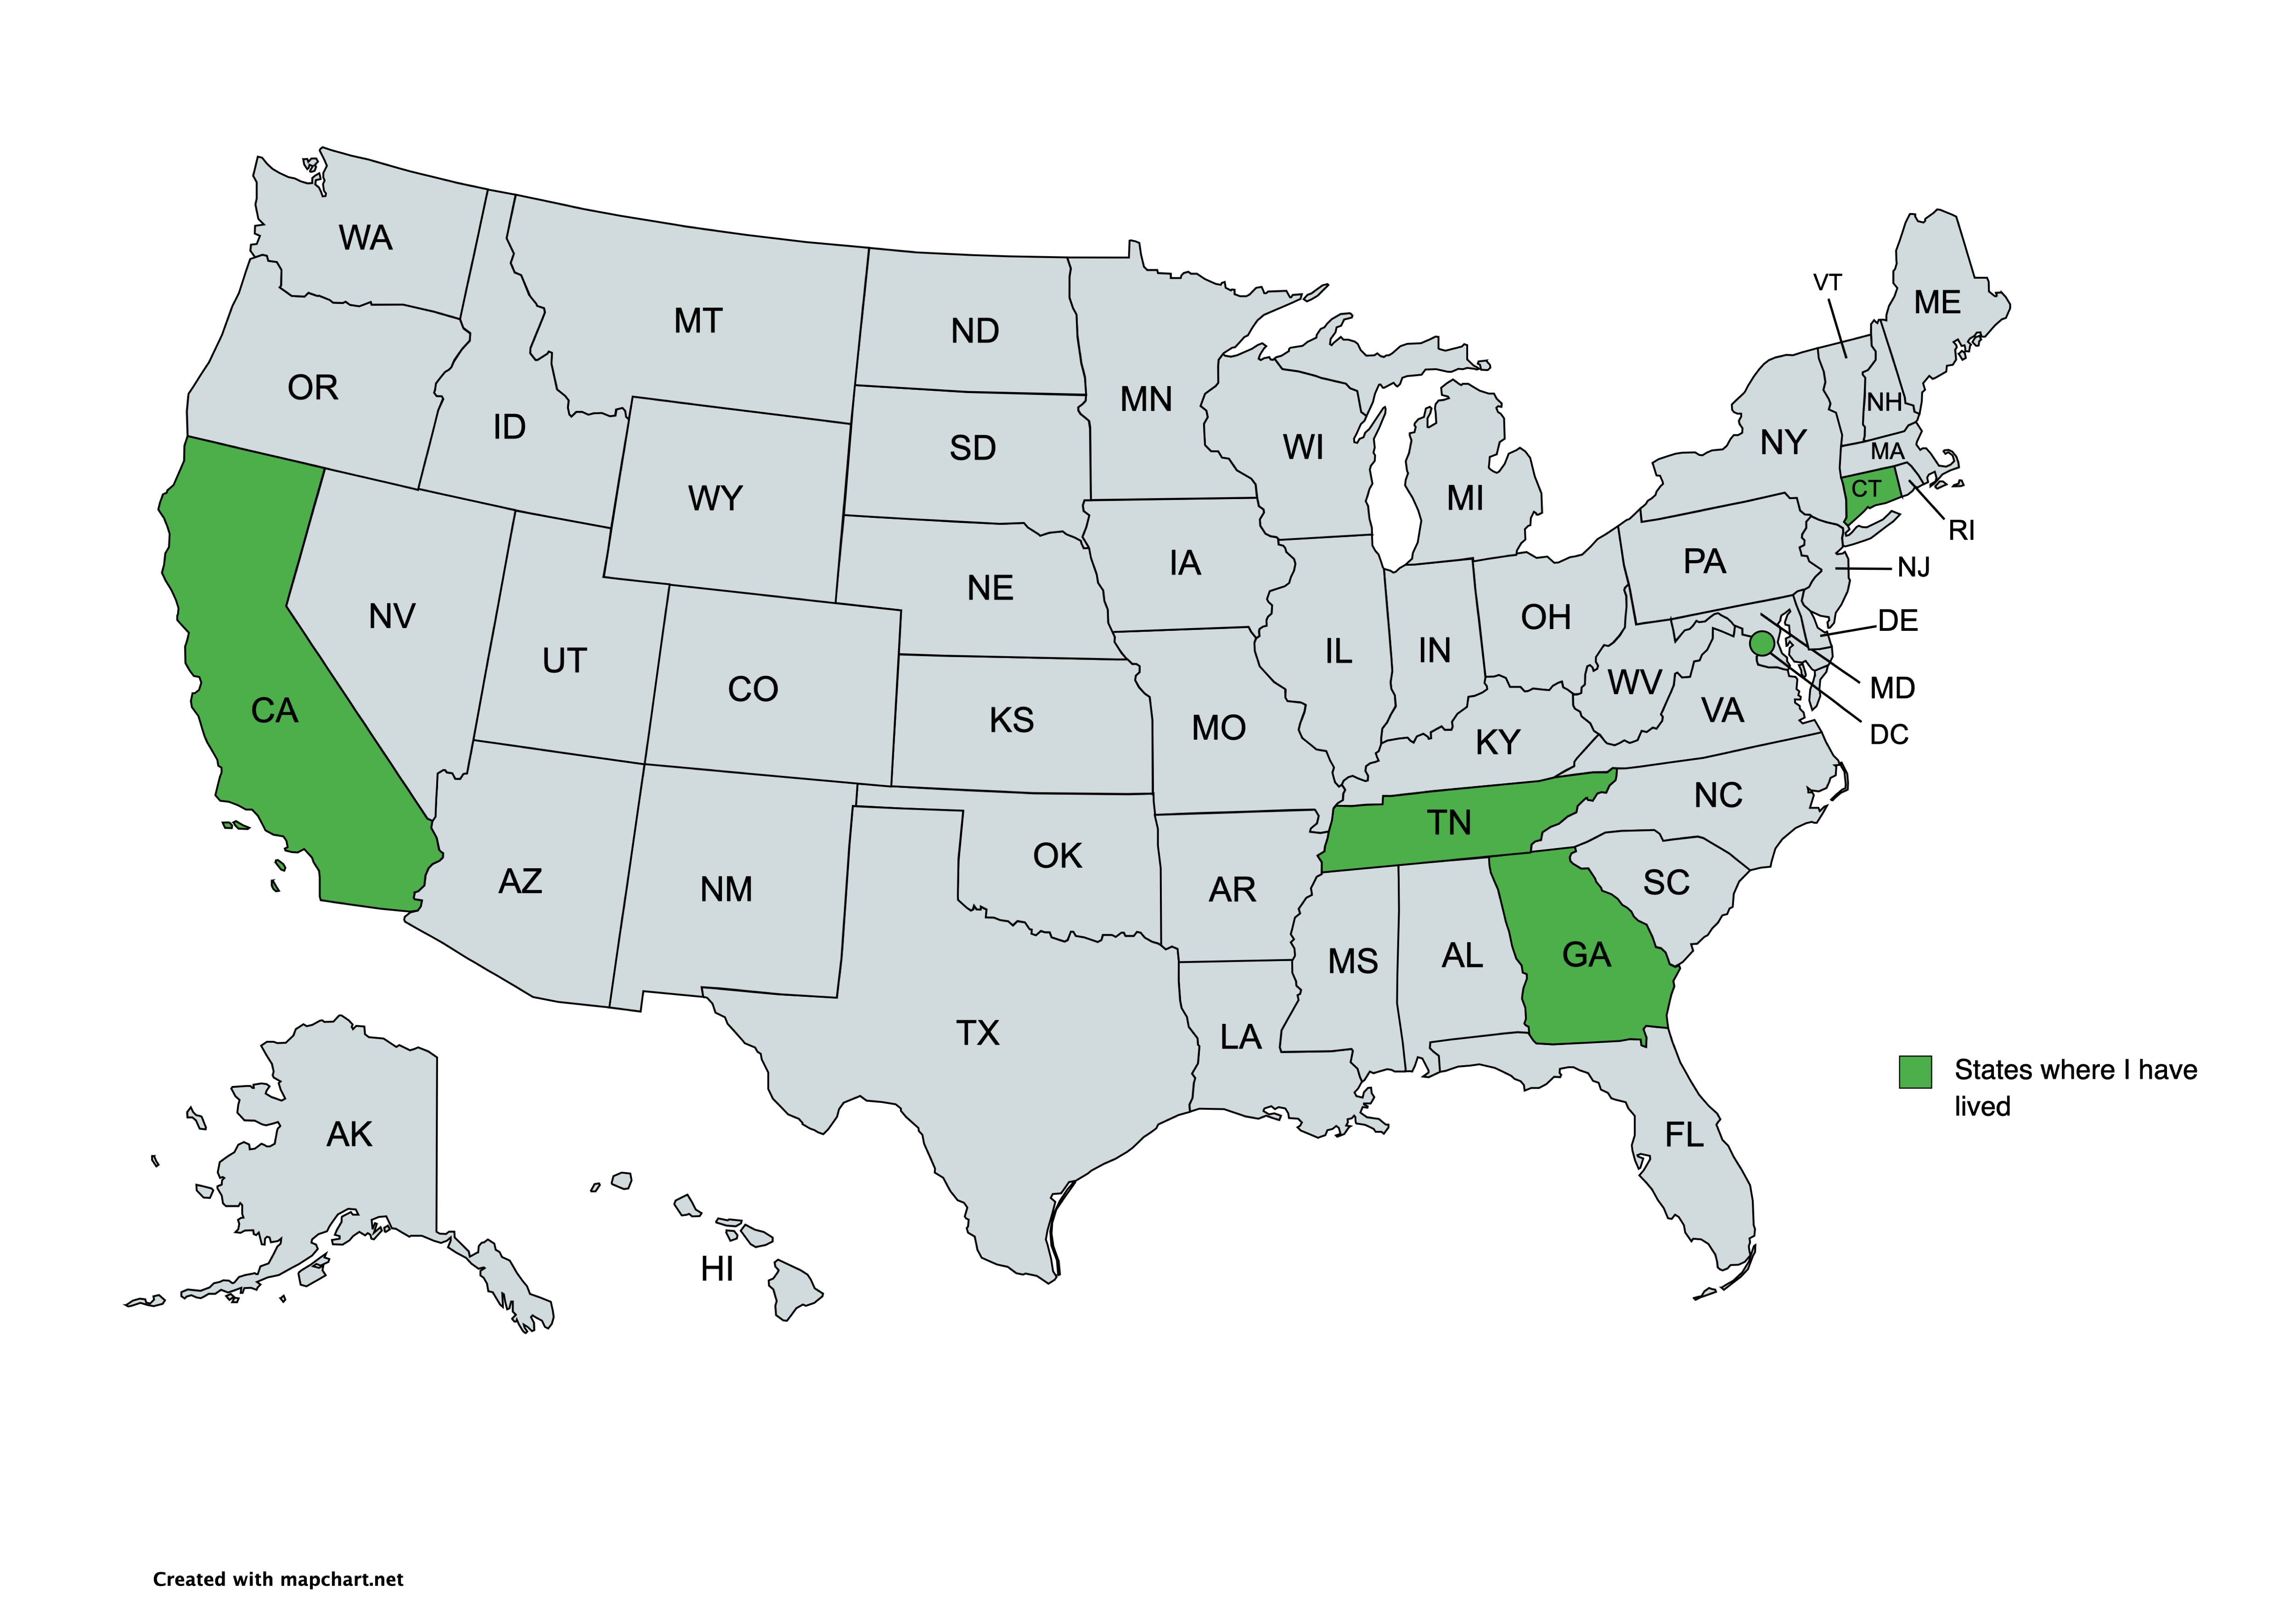 These are the states I've lived in. Defined as signed a lease here.